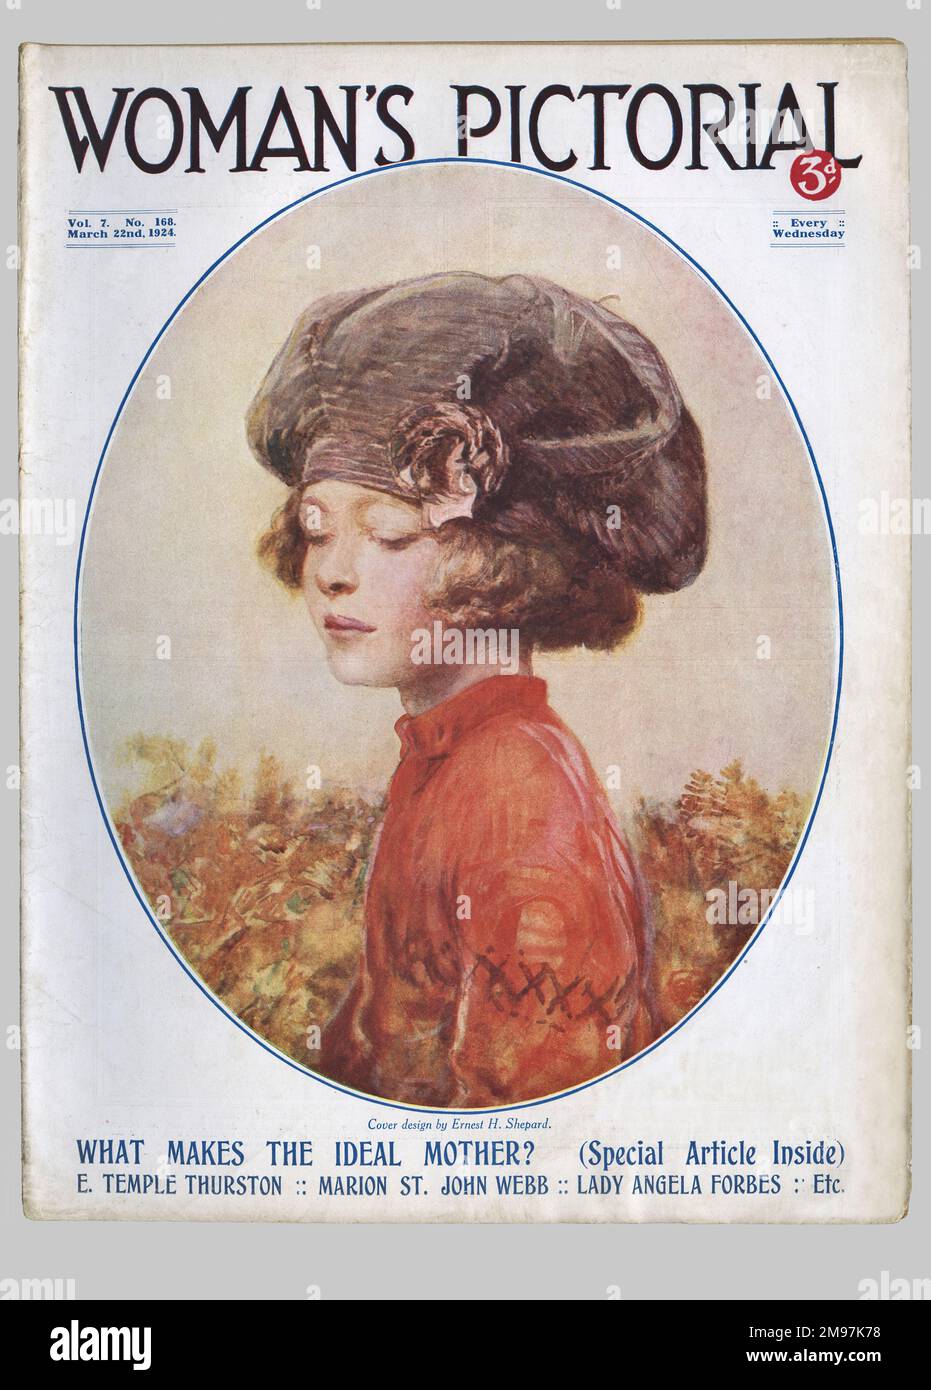 Cover design by Ernest H Shepard, Woman's Pictorial magazine, 22 March 1924. Depicting a girl in an orange tunic and a large brown hat. With a special article entitled What Makes the Ideal Mother?, and items by E Temple Thurston, Marion St John Webb and Lady Angela Forbes. Stock Photo